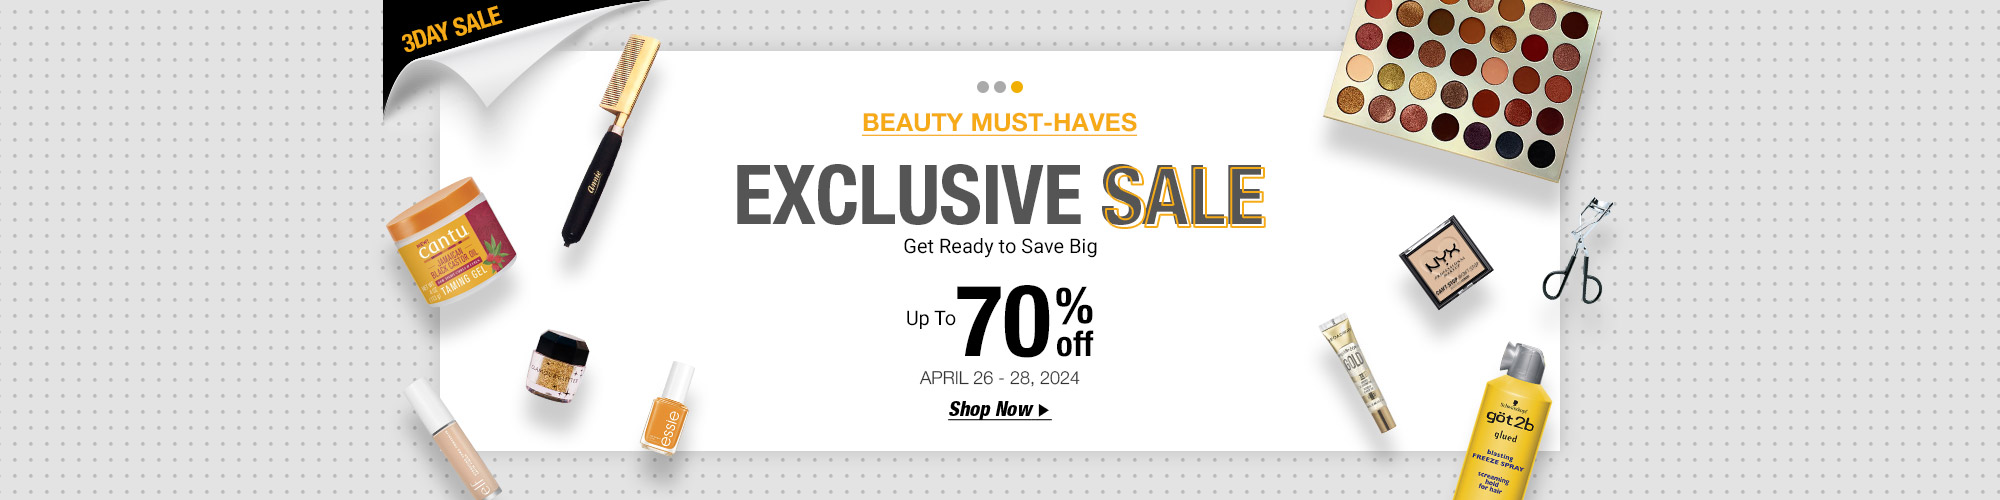 EXCLUSIVE SALE - BEAUTY MUST HAVES